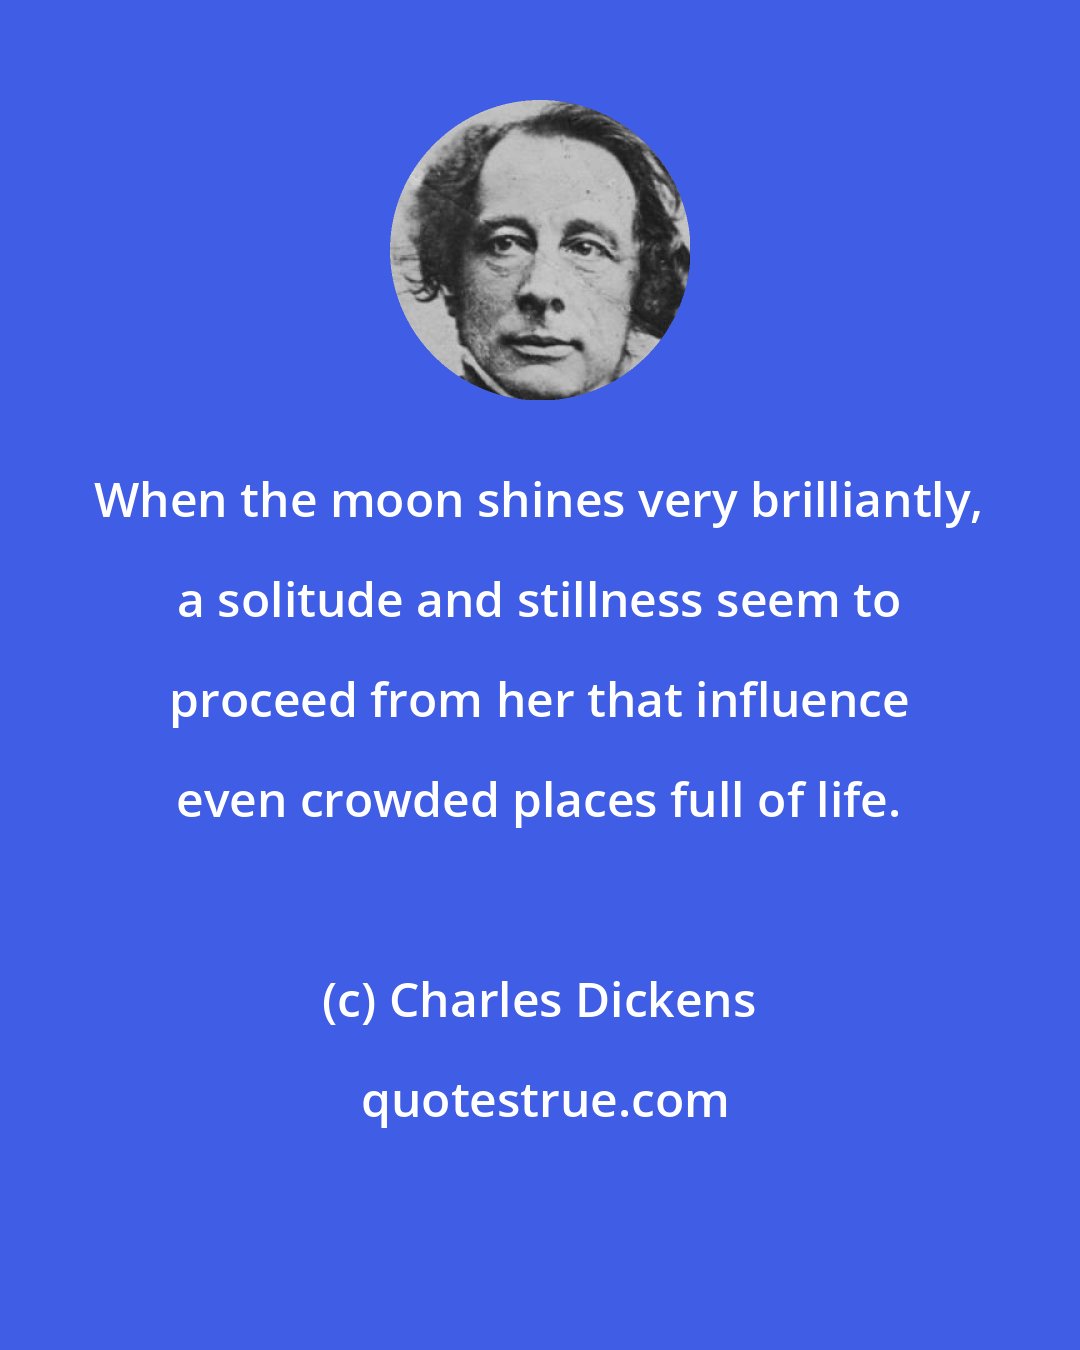 Charles Dickens: When the moon shines very brilliantly, a solitude and stillness seem to proceed from her that influence even crowded places full of life.